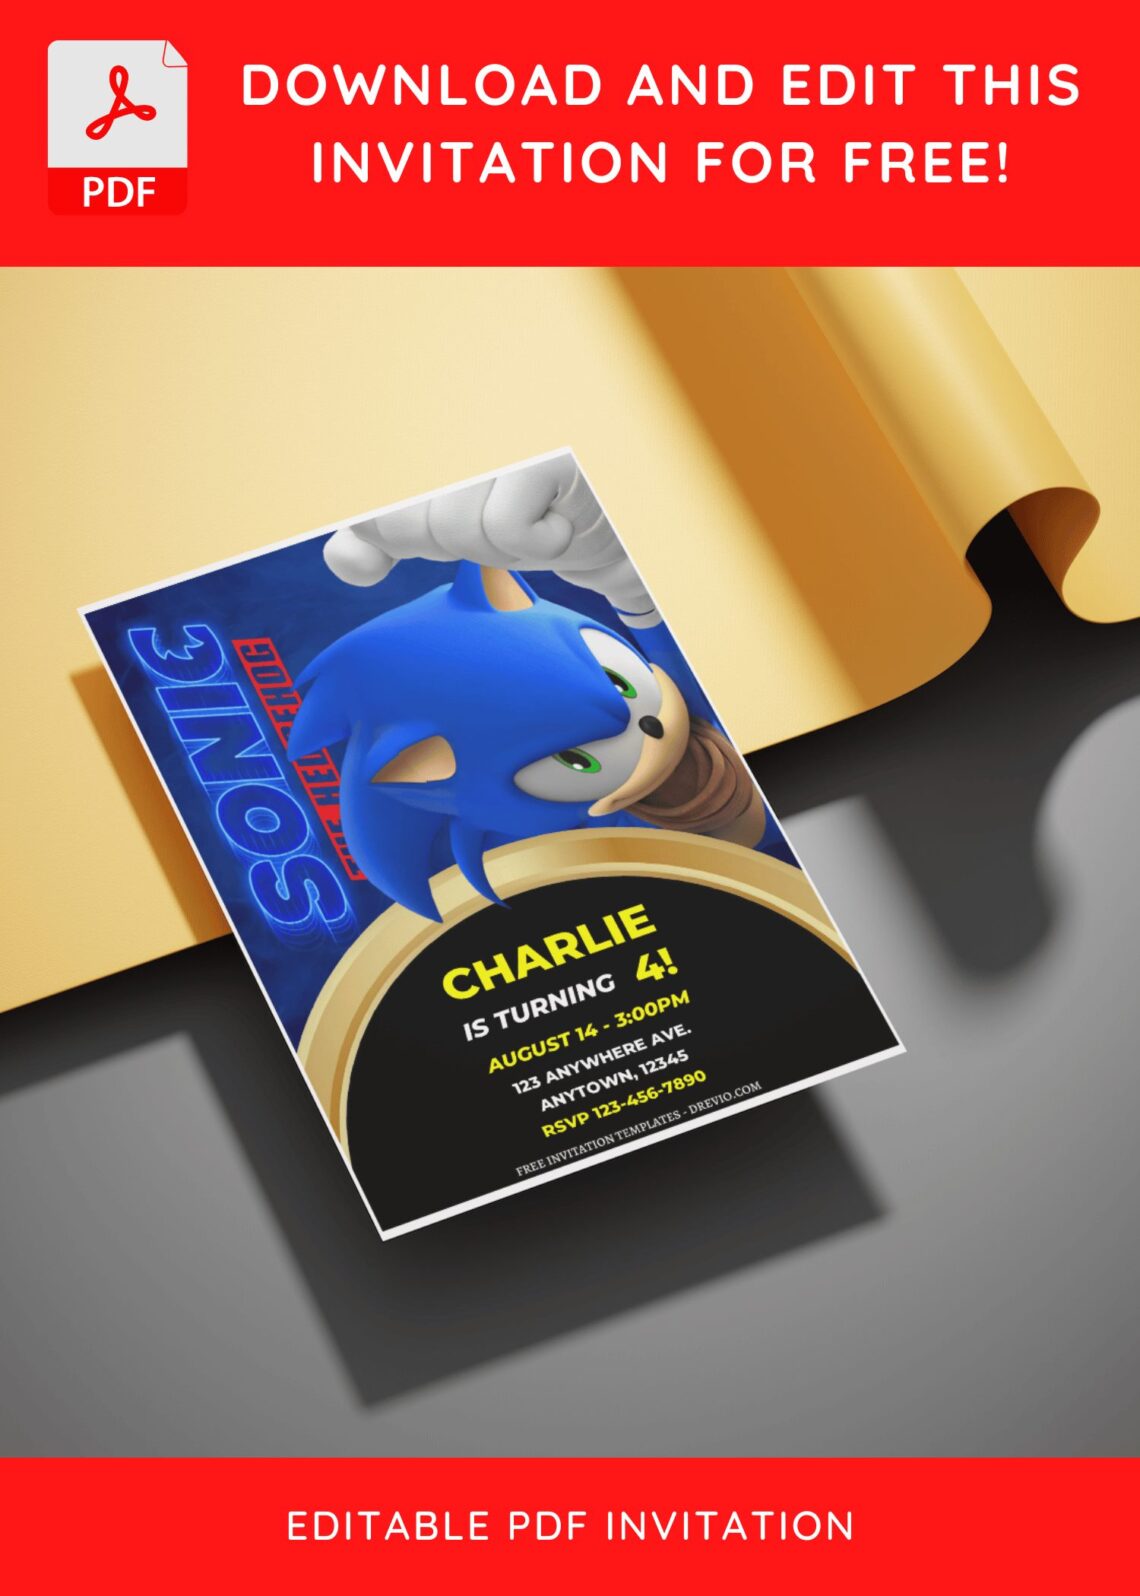 (Free Editable PDF) Spectacular Sonic The Hedgehog Birthday Invitation Templates with sonic the movie images